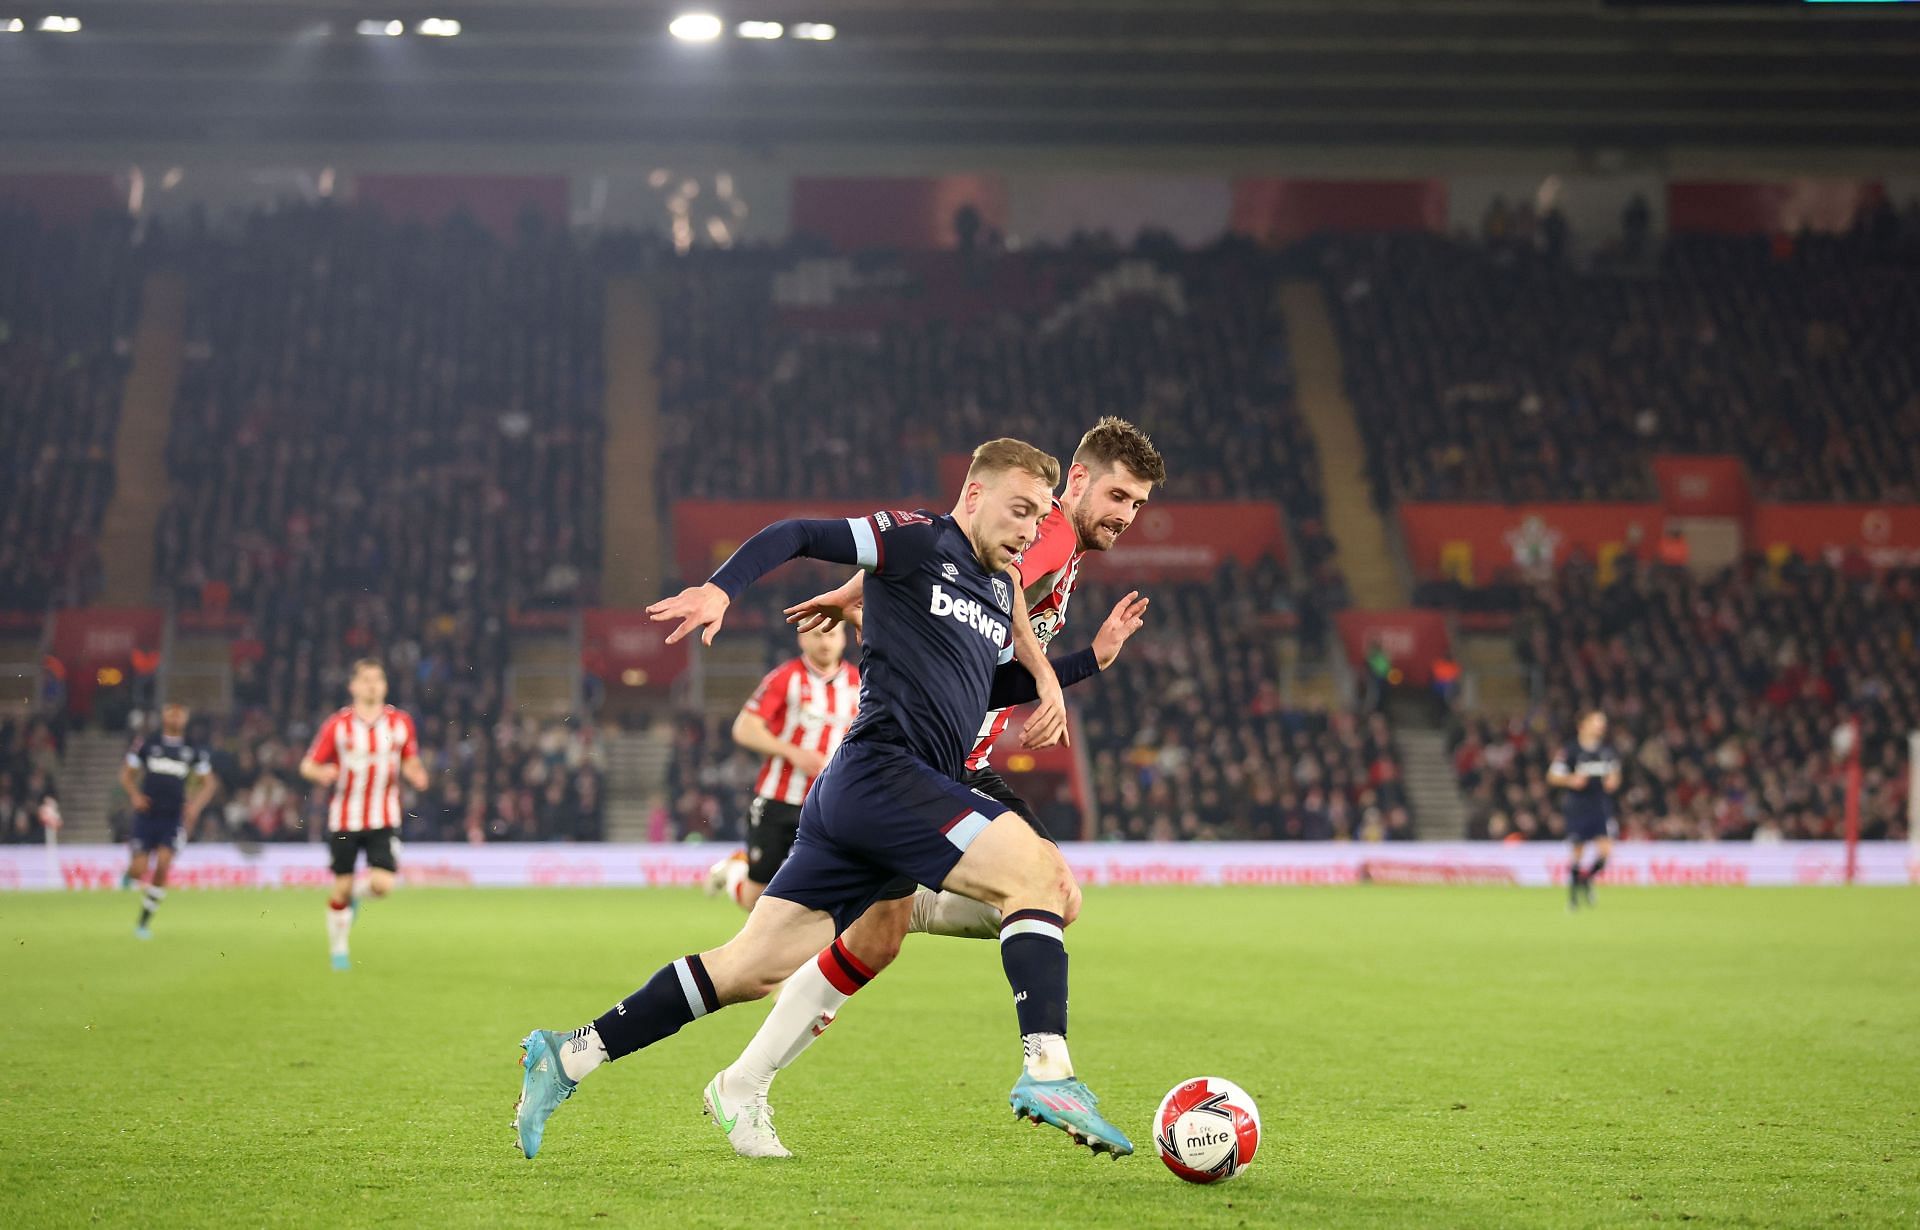 Southampton v West Ham United: The Emirates FA Cup Fifth Round